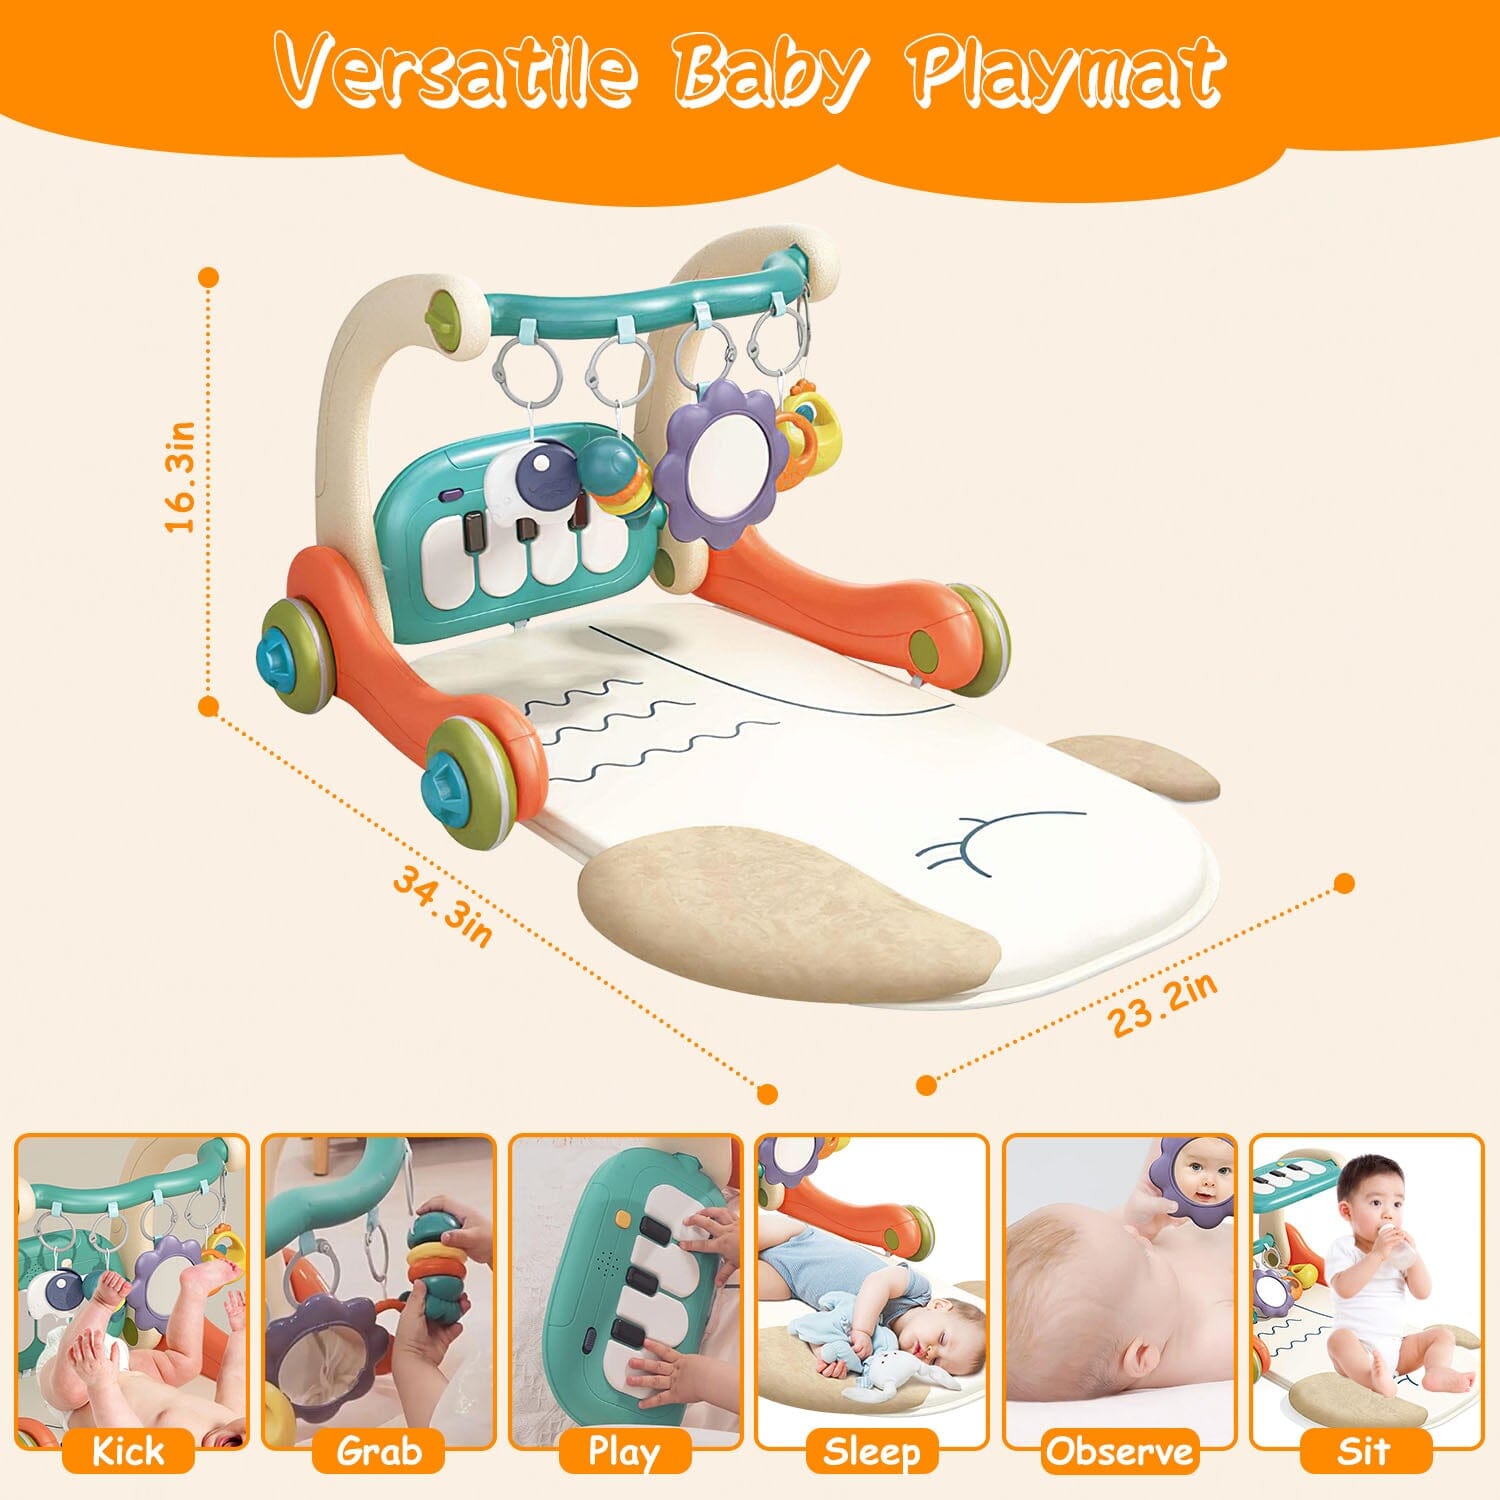 3-in-1 Baby Gym Playmat with Learning Walker for 0-12 Months Old